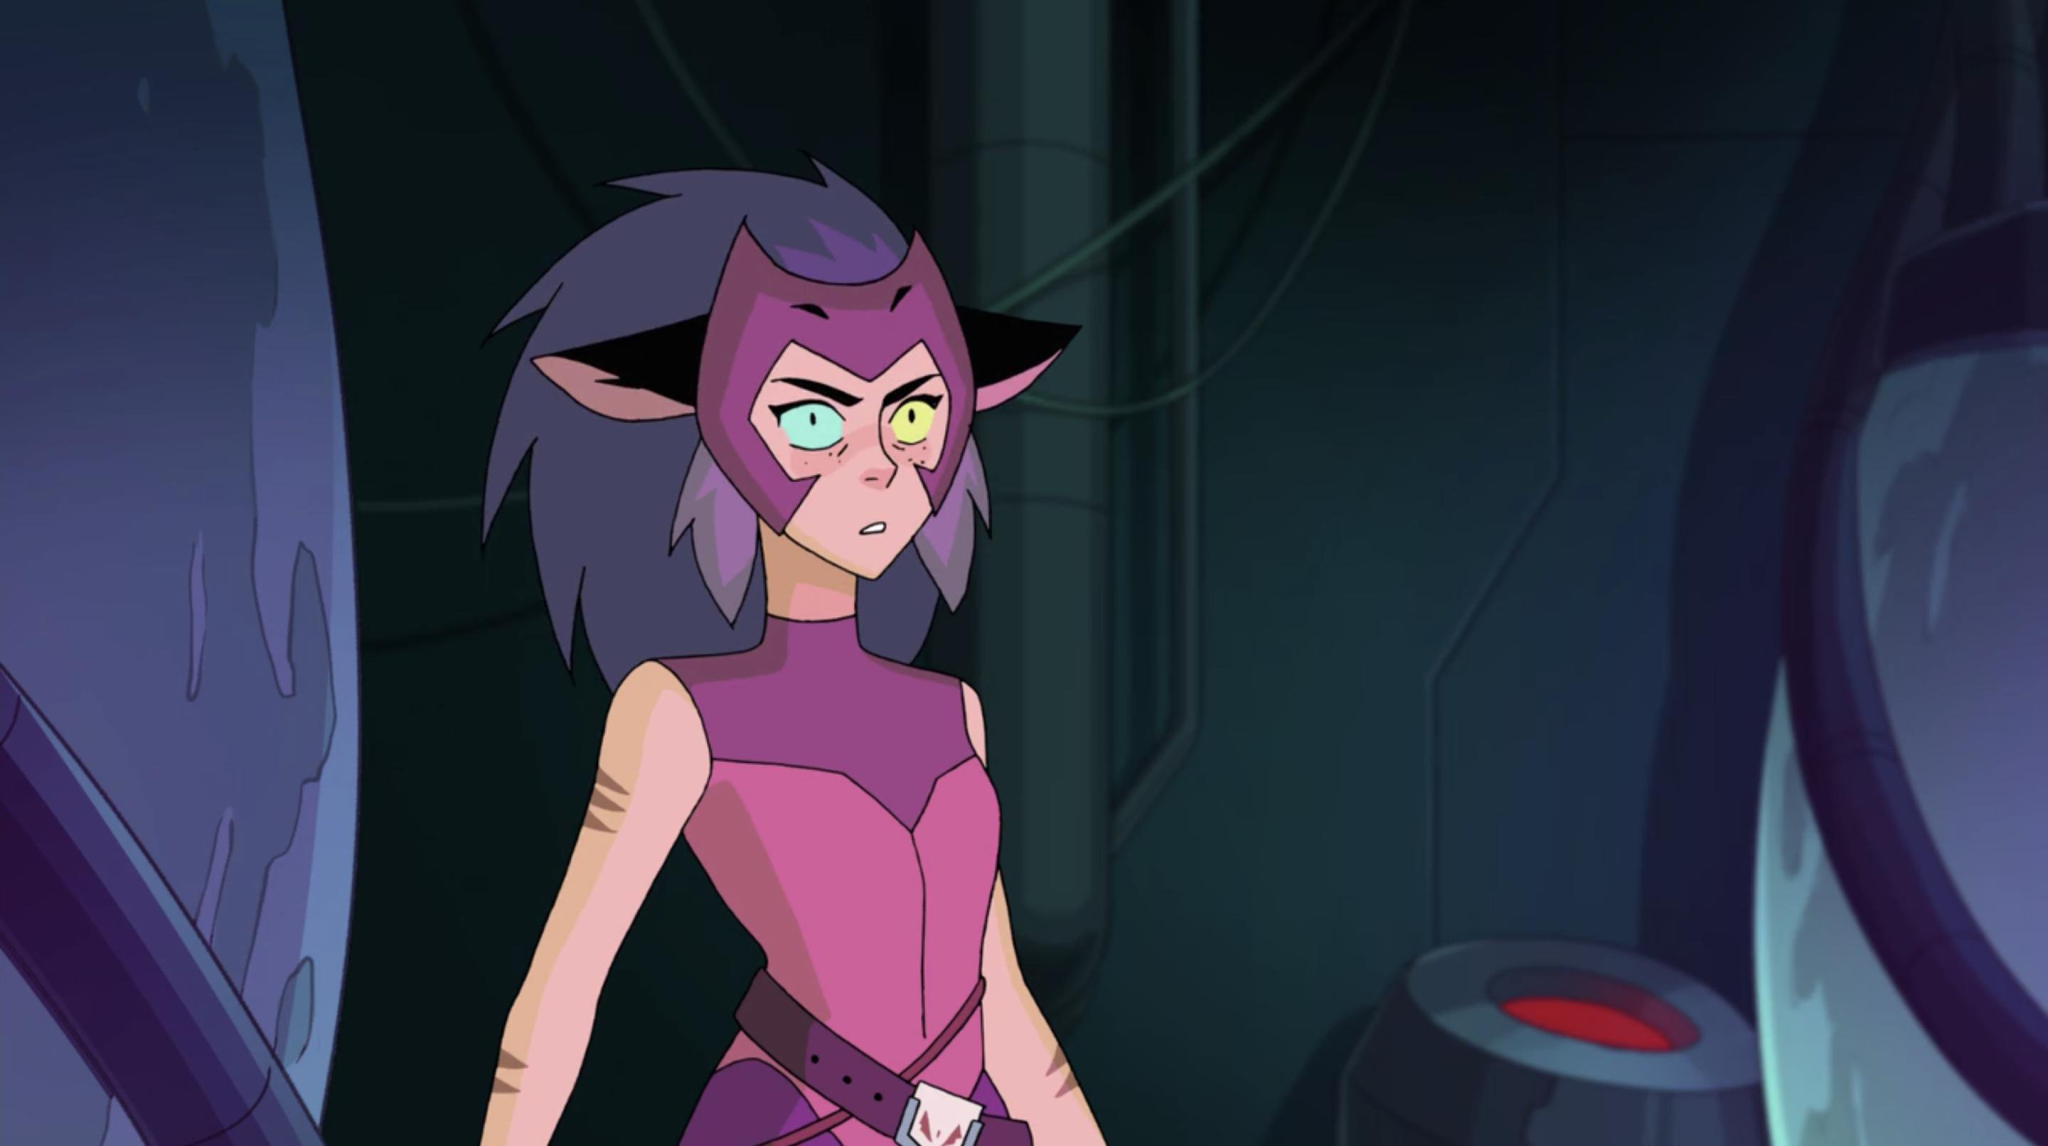 stellalights:  bruh in ep 5 when adora tries to fix her mistake of leaving behind catra in the first place and invites her to come with her and catra still fights her…their dynamic is changed forever now.at the end of the season you can see in adora’s